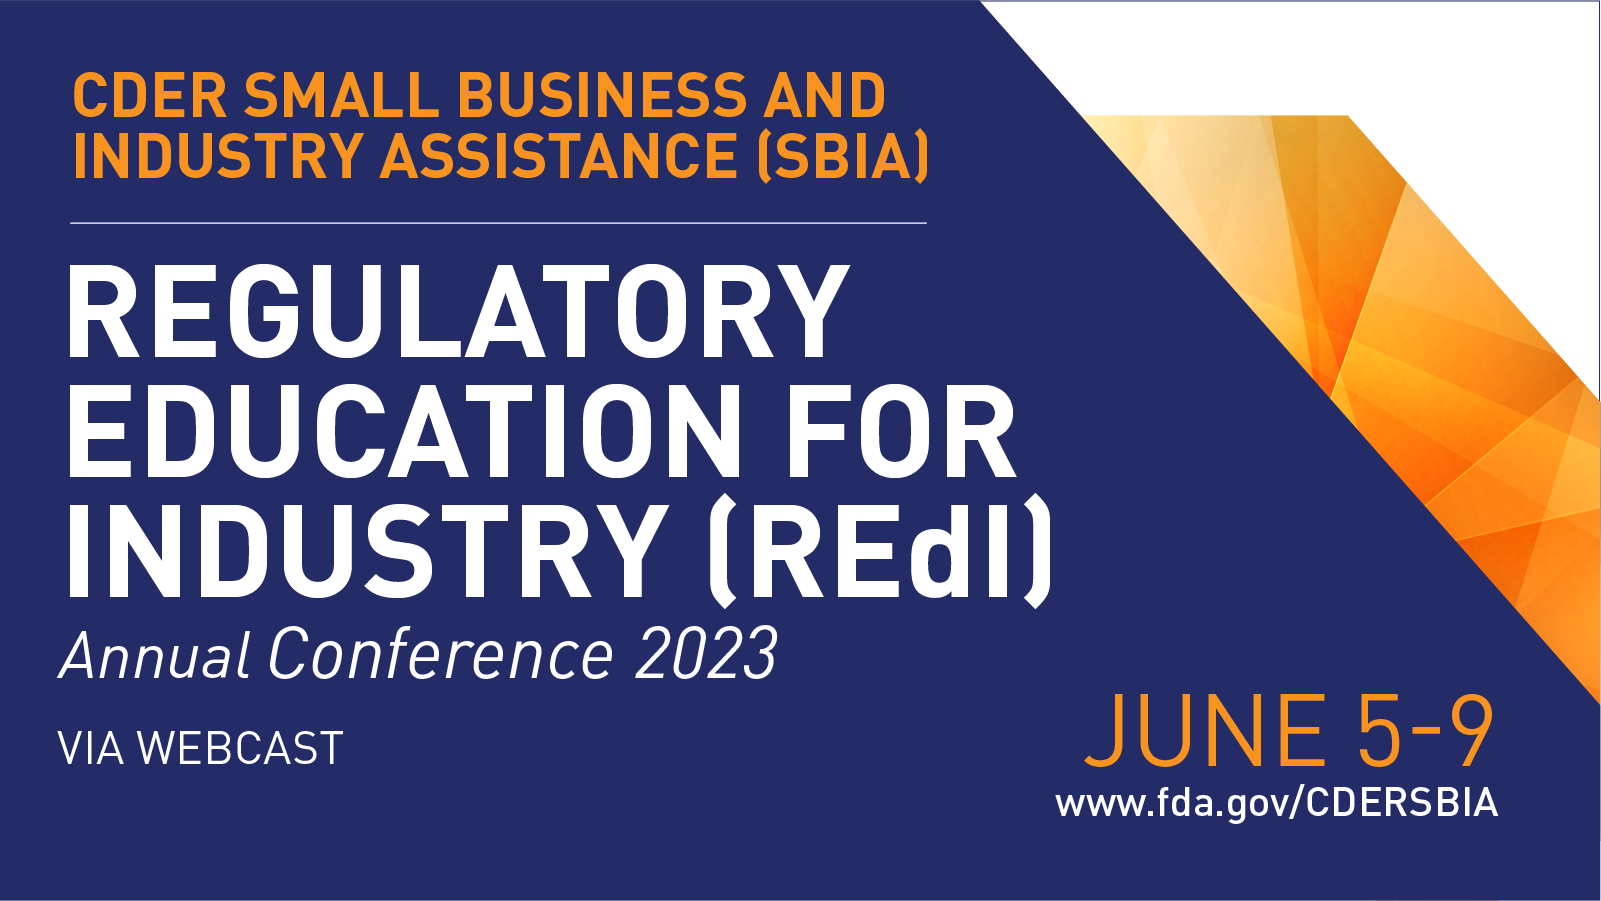 Regulatory Education for Industry (REdI) Annual Conference 2023, via Webcast, June 5-9